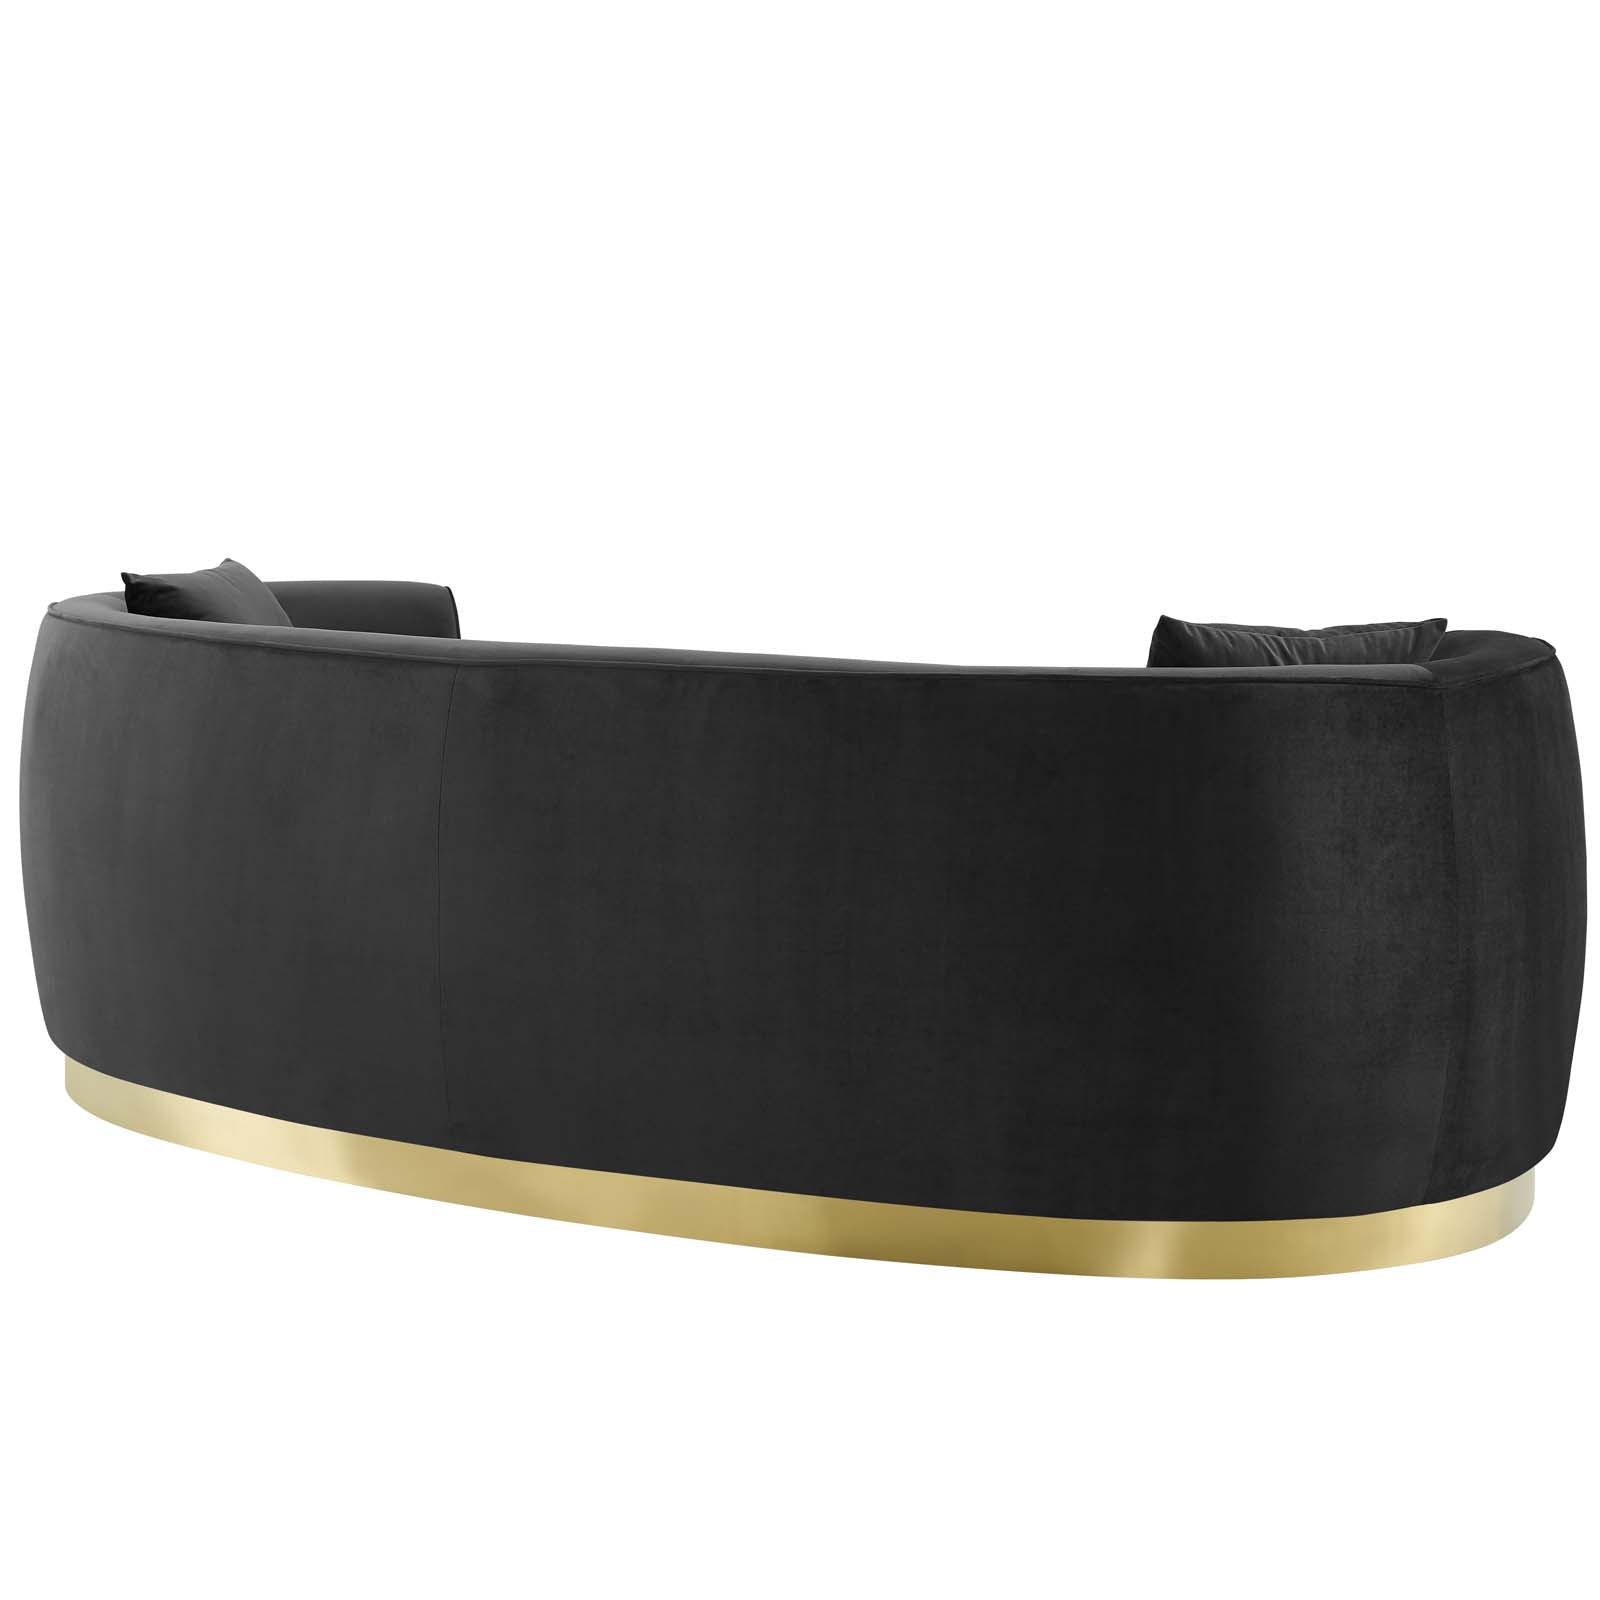 Modway Sofas & Couches - Resolute Curved Performance Velvet Sofa Black